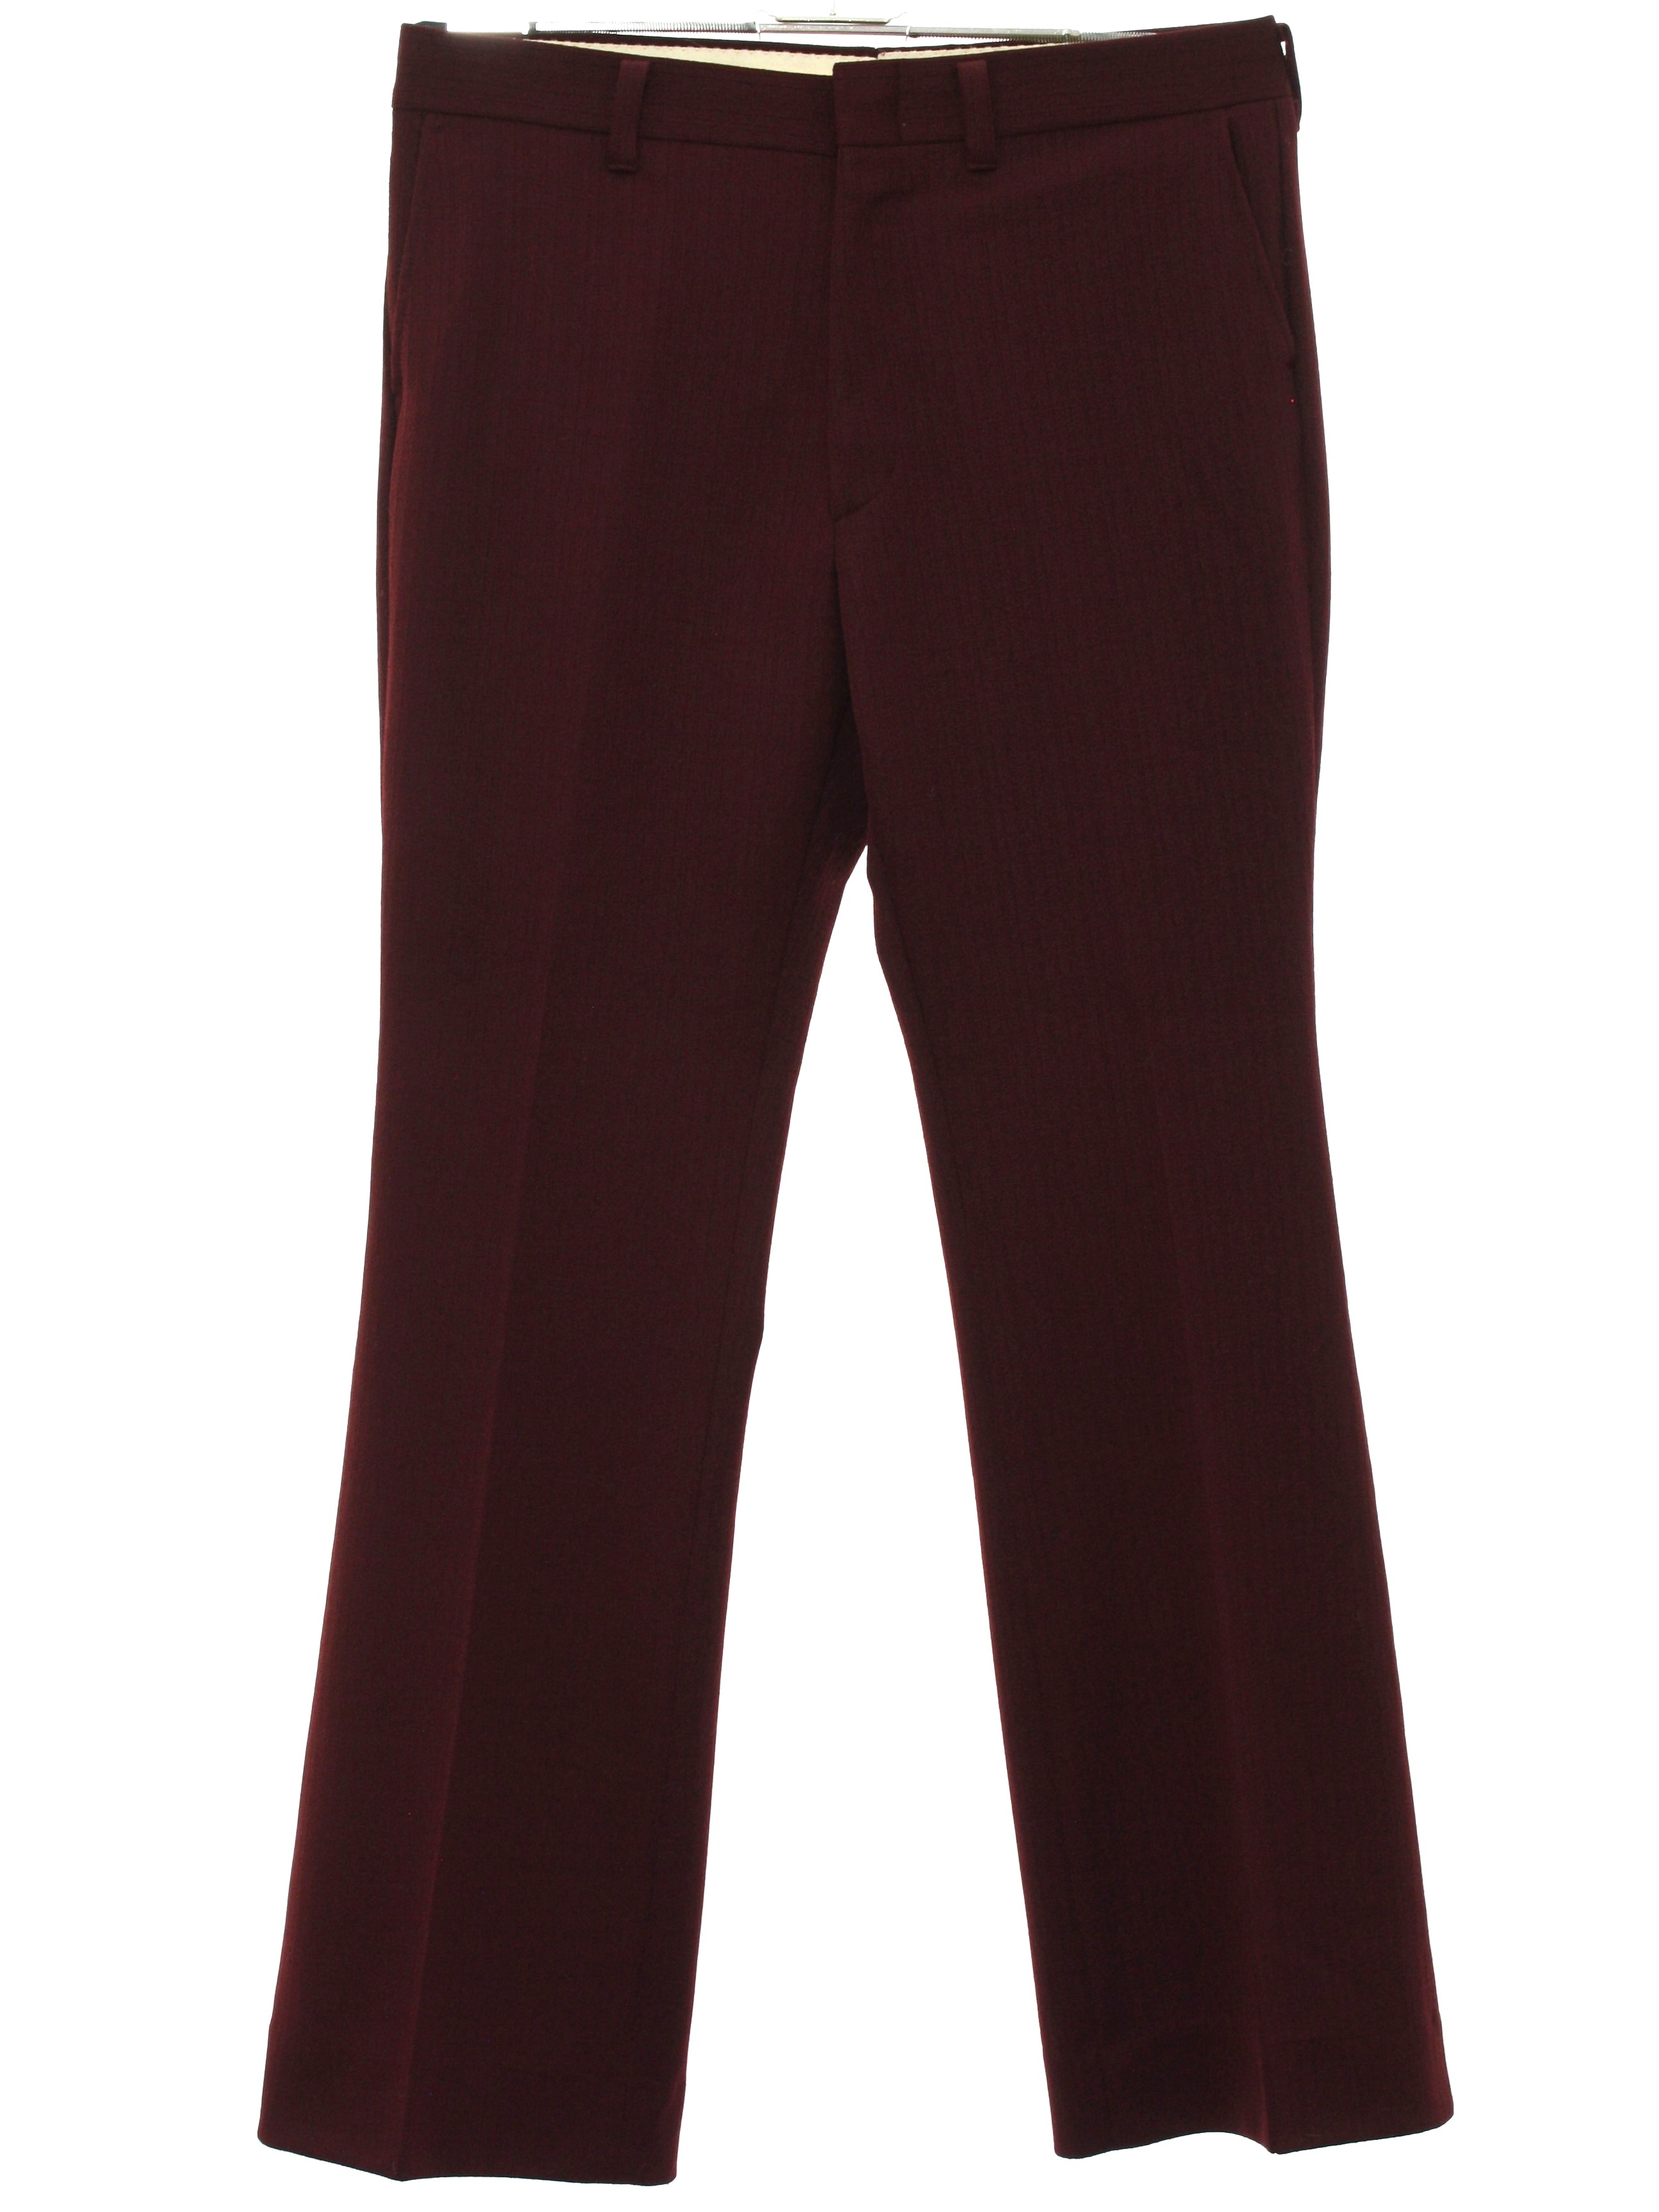 Retro 1970s Flared Pants / Flares: 70s -Care Label- Mens burgundy solid ...